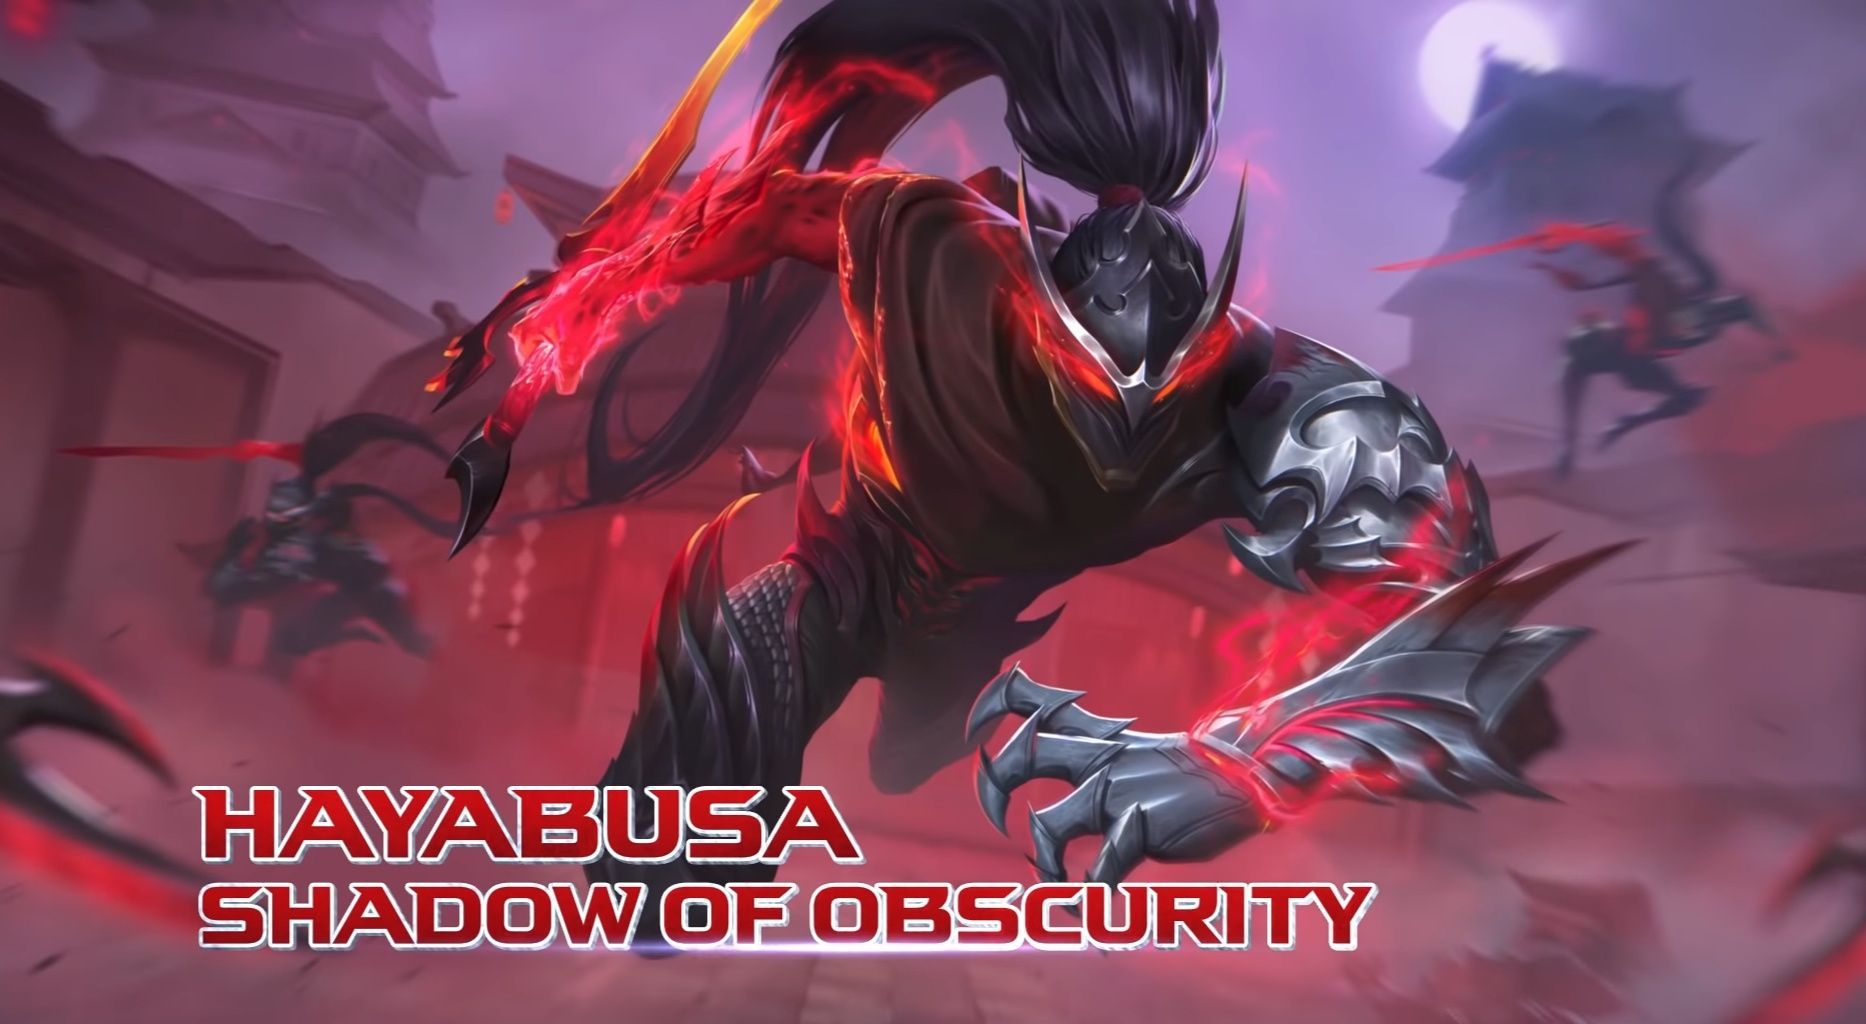 Hayabusa Shadow Of Obscurity Wallpapers Wallpaper Cave